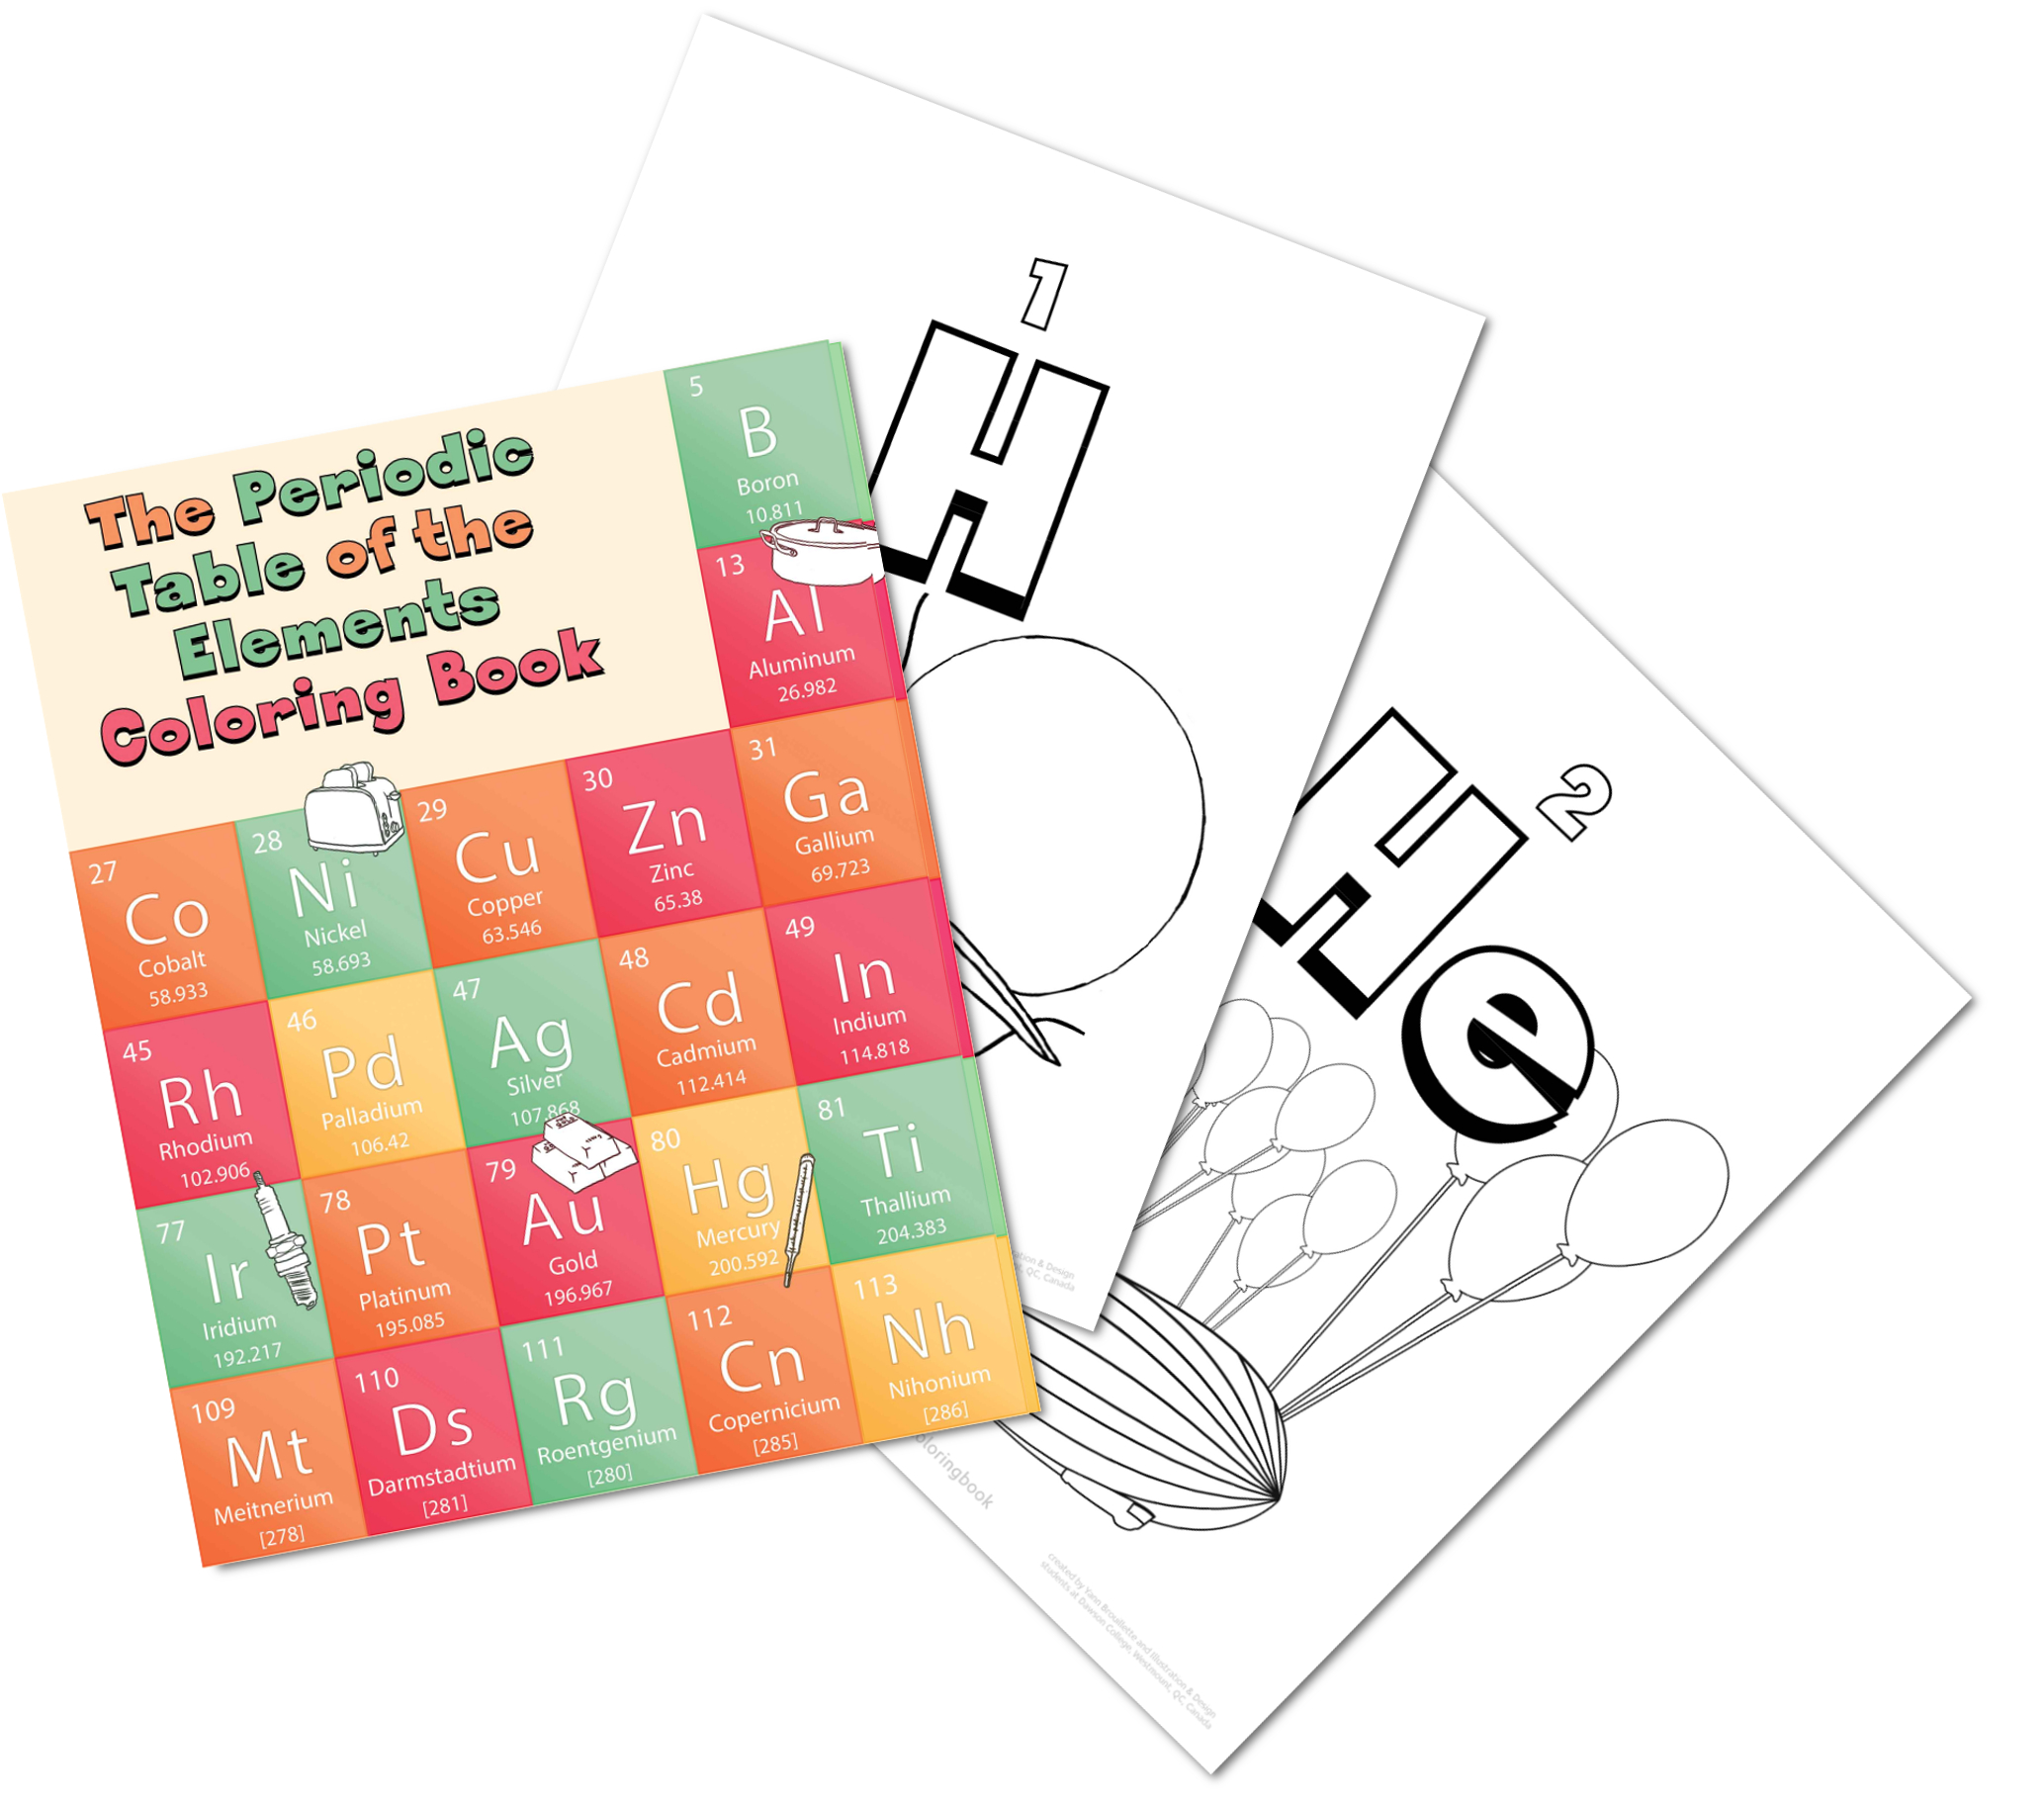 Periodic table of the elements coloring book